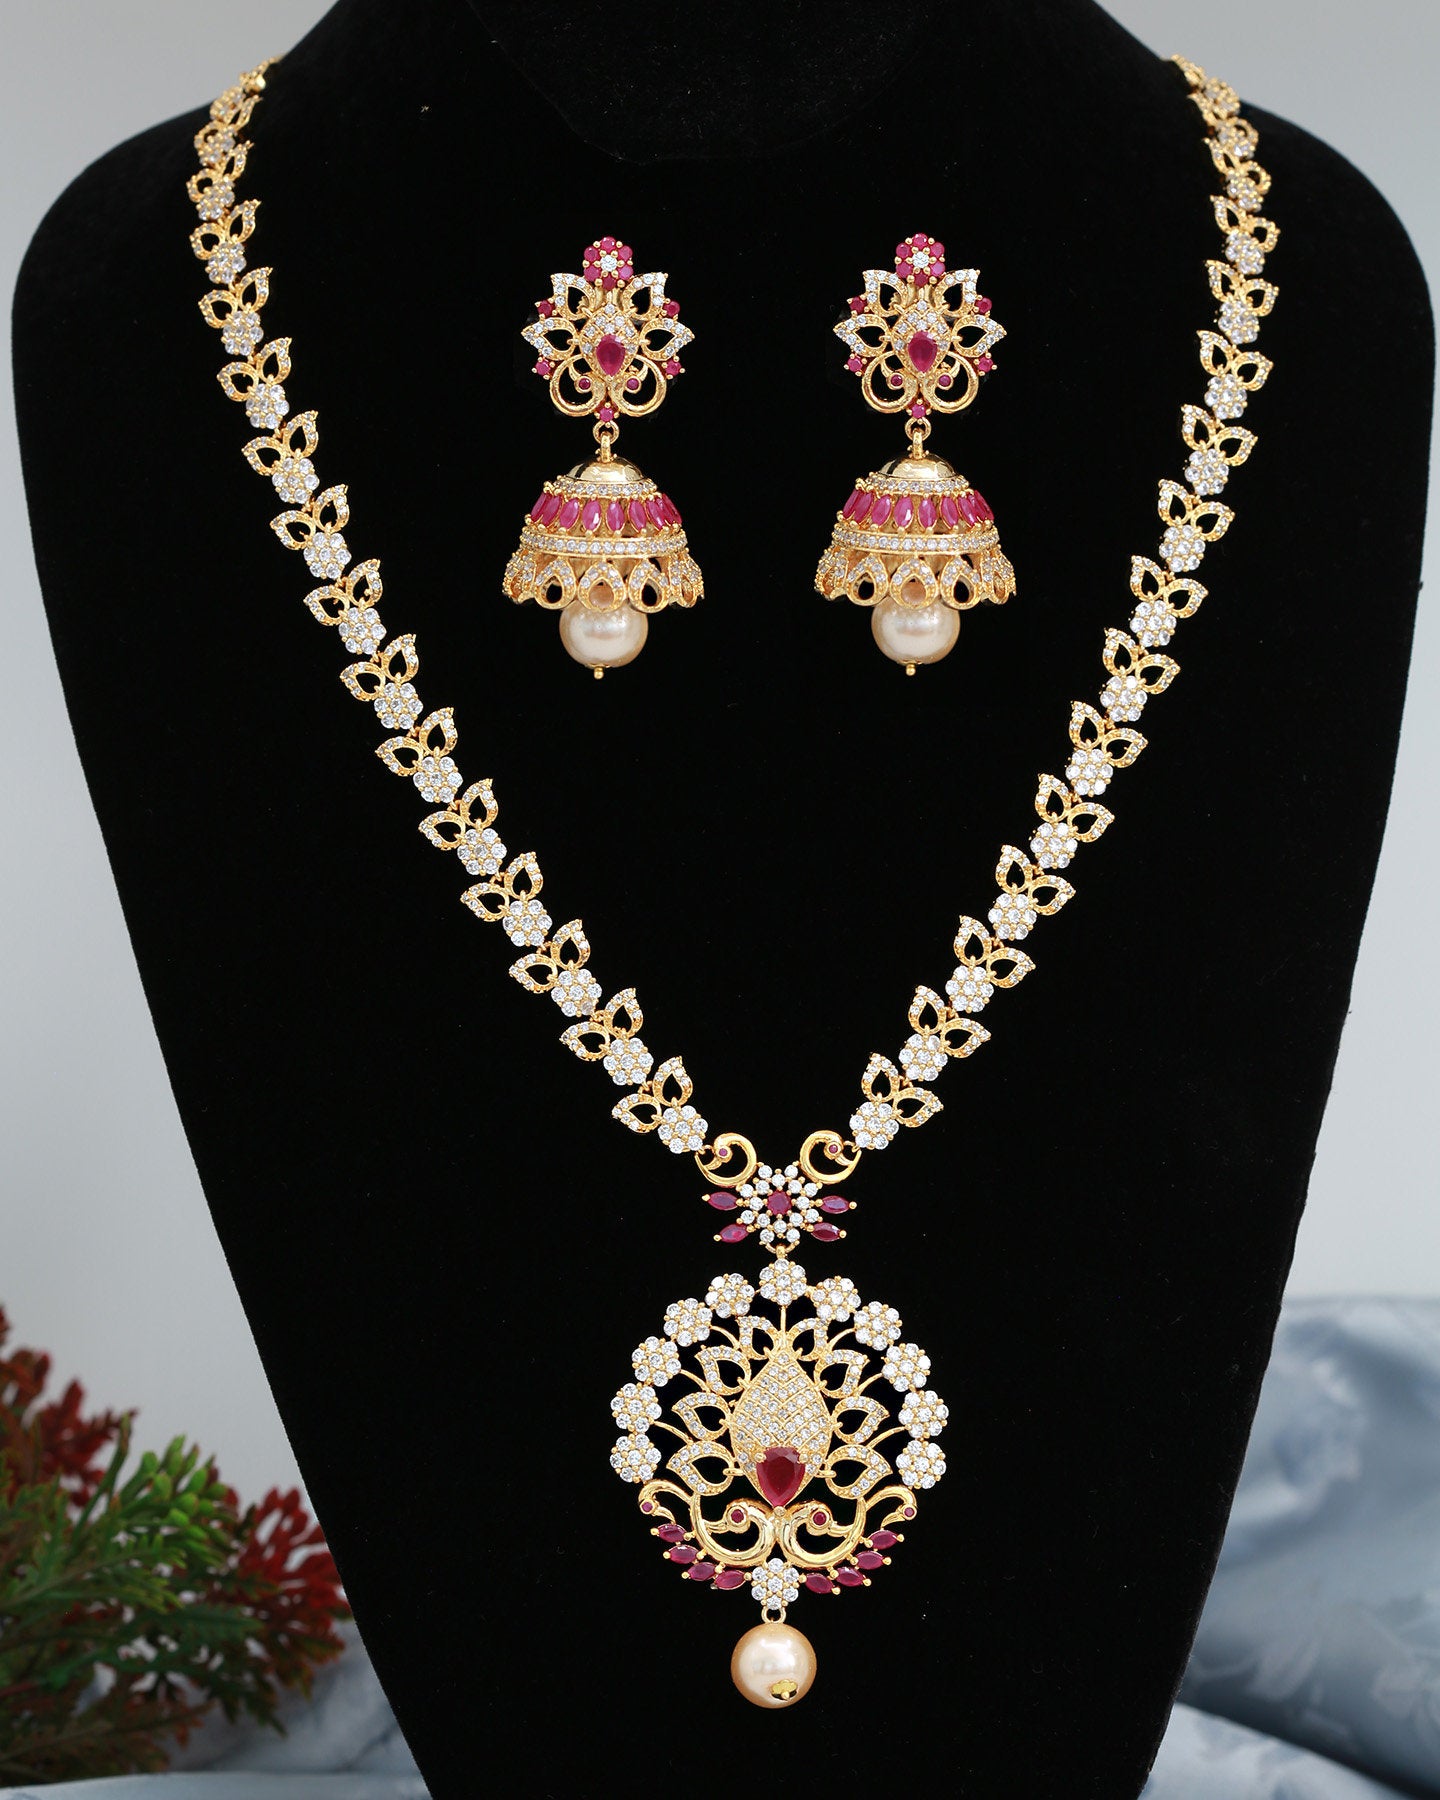 Indian Jewelry American Diamond Long Necklace & Jhumka Earrings Set, Peacock Motif Bridal Gold-Plated Jewelry with Pearls and Ruby Accents